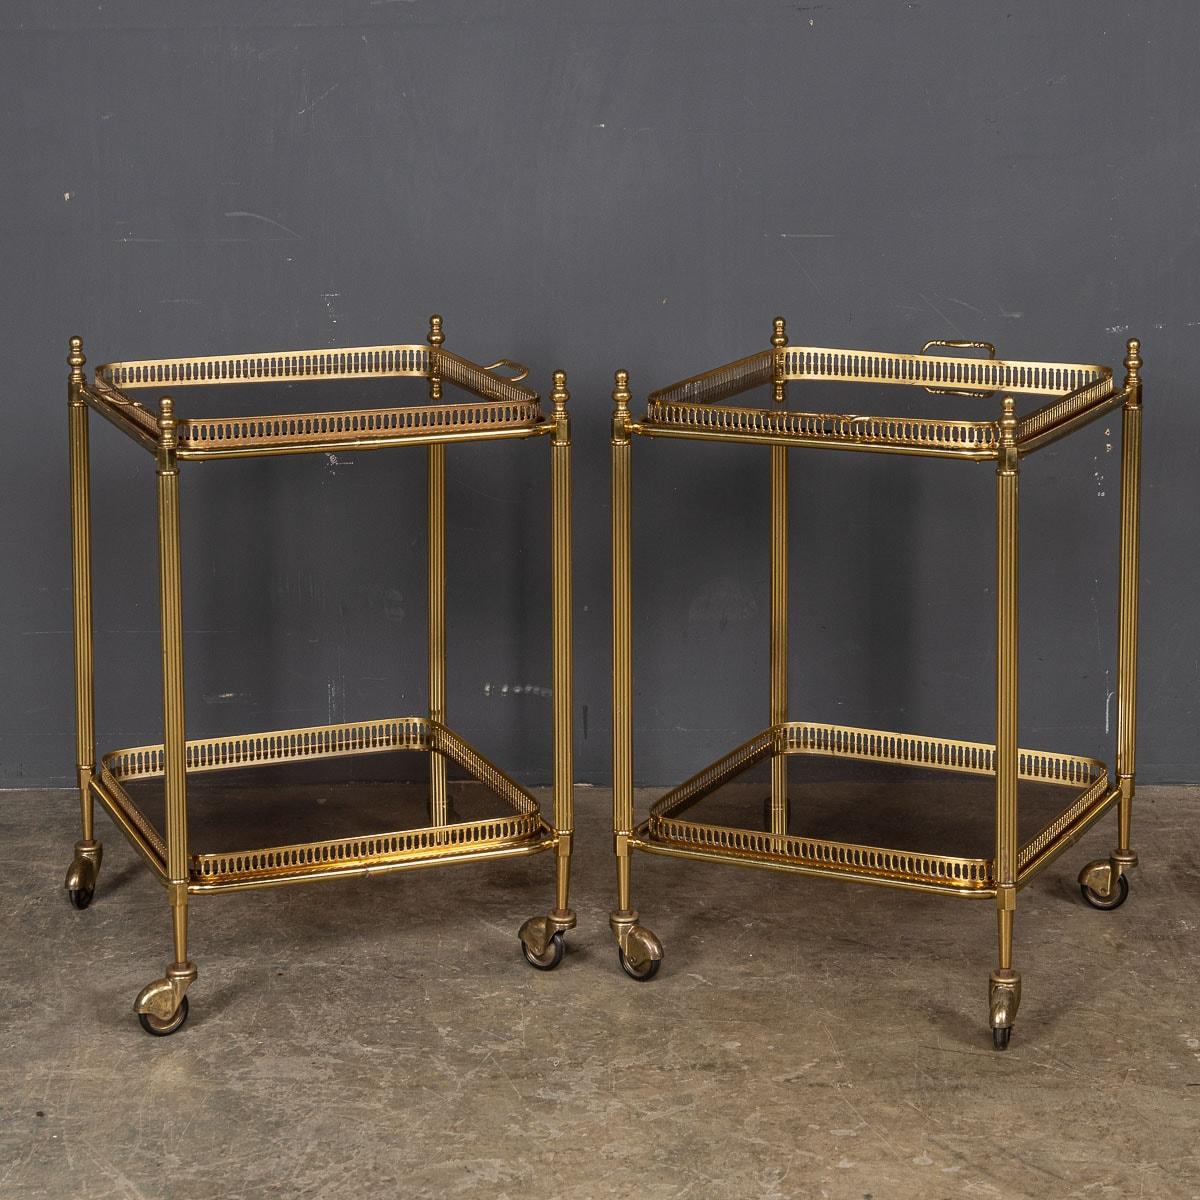 Two elegant drink trolleys crafted in France during the latter part of the 20th Century feature a beautifully fluted brass frame adorned with finials, providing sturdy support for two glass shelves. These exquisite pieces of furniture are not only